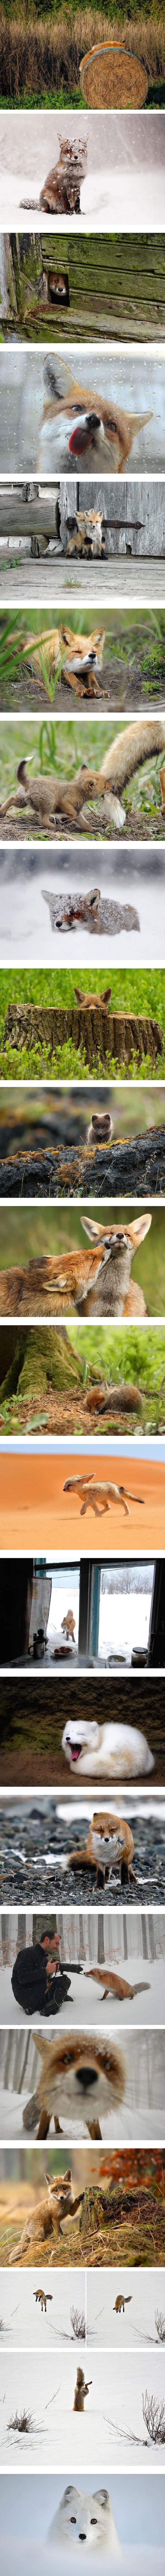 Foxes are cute